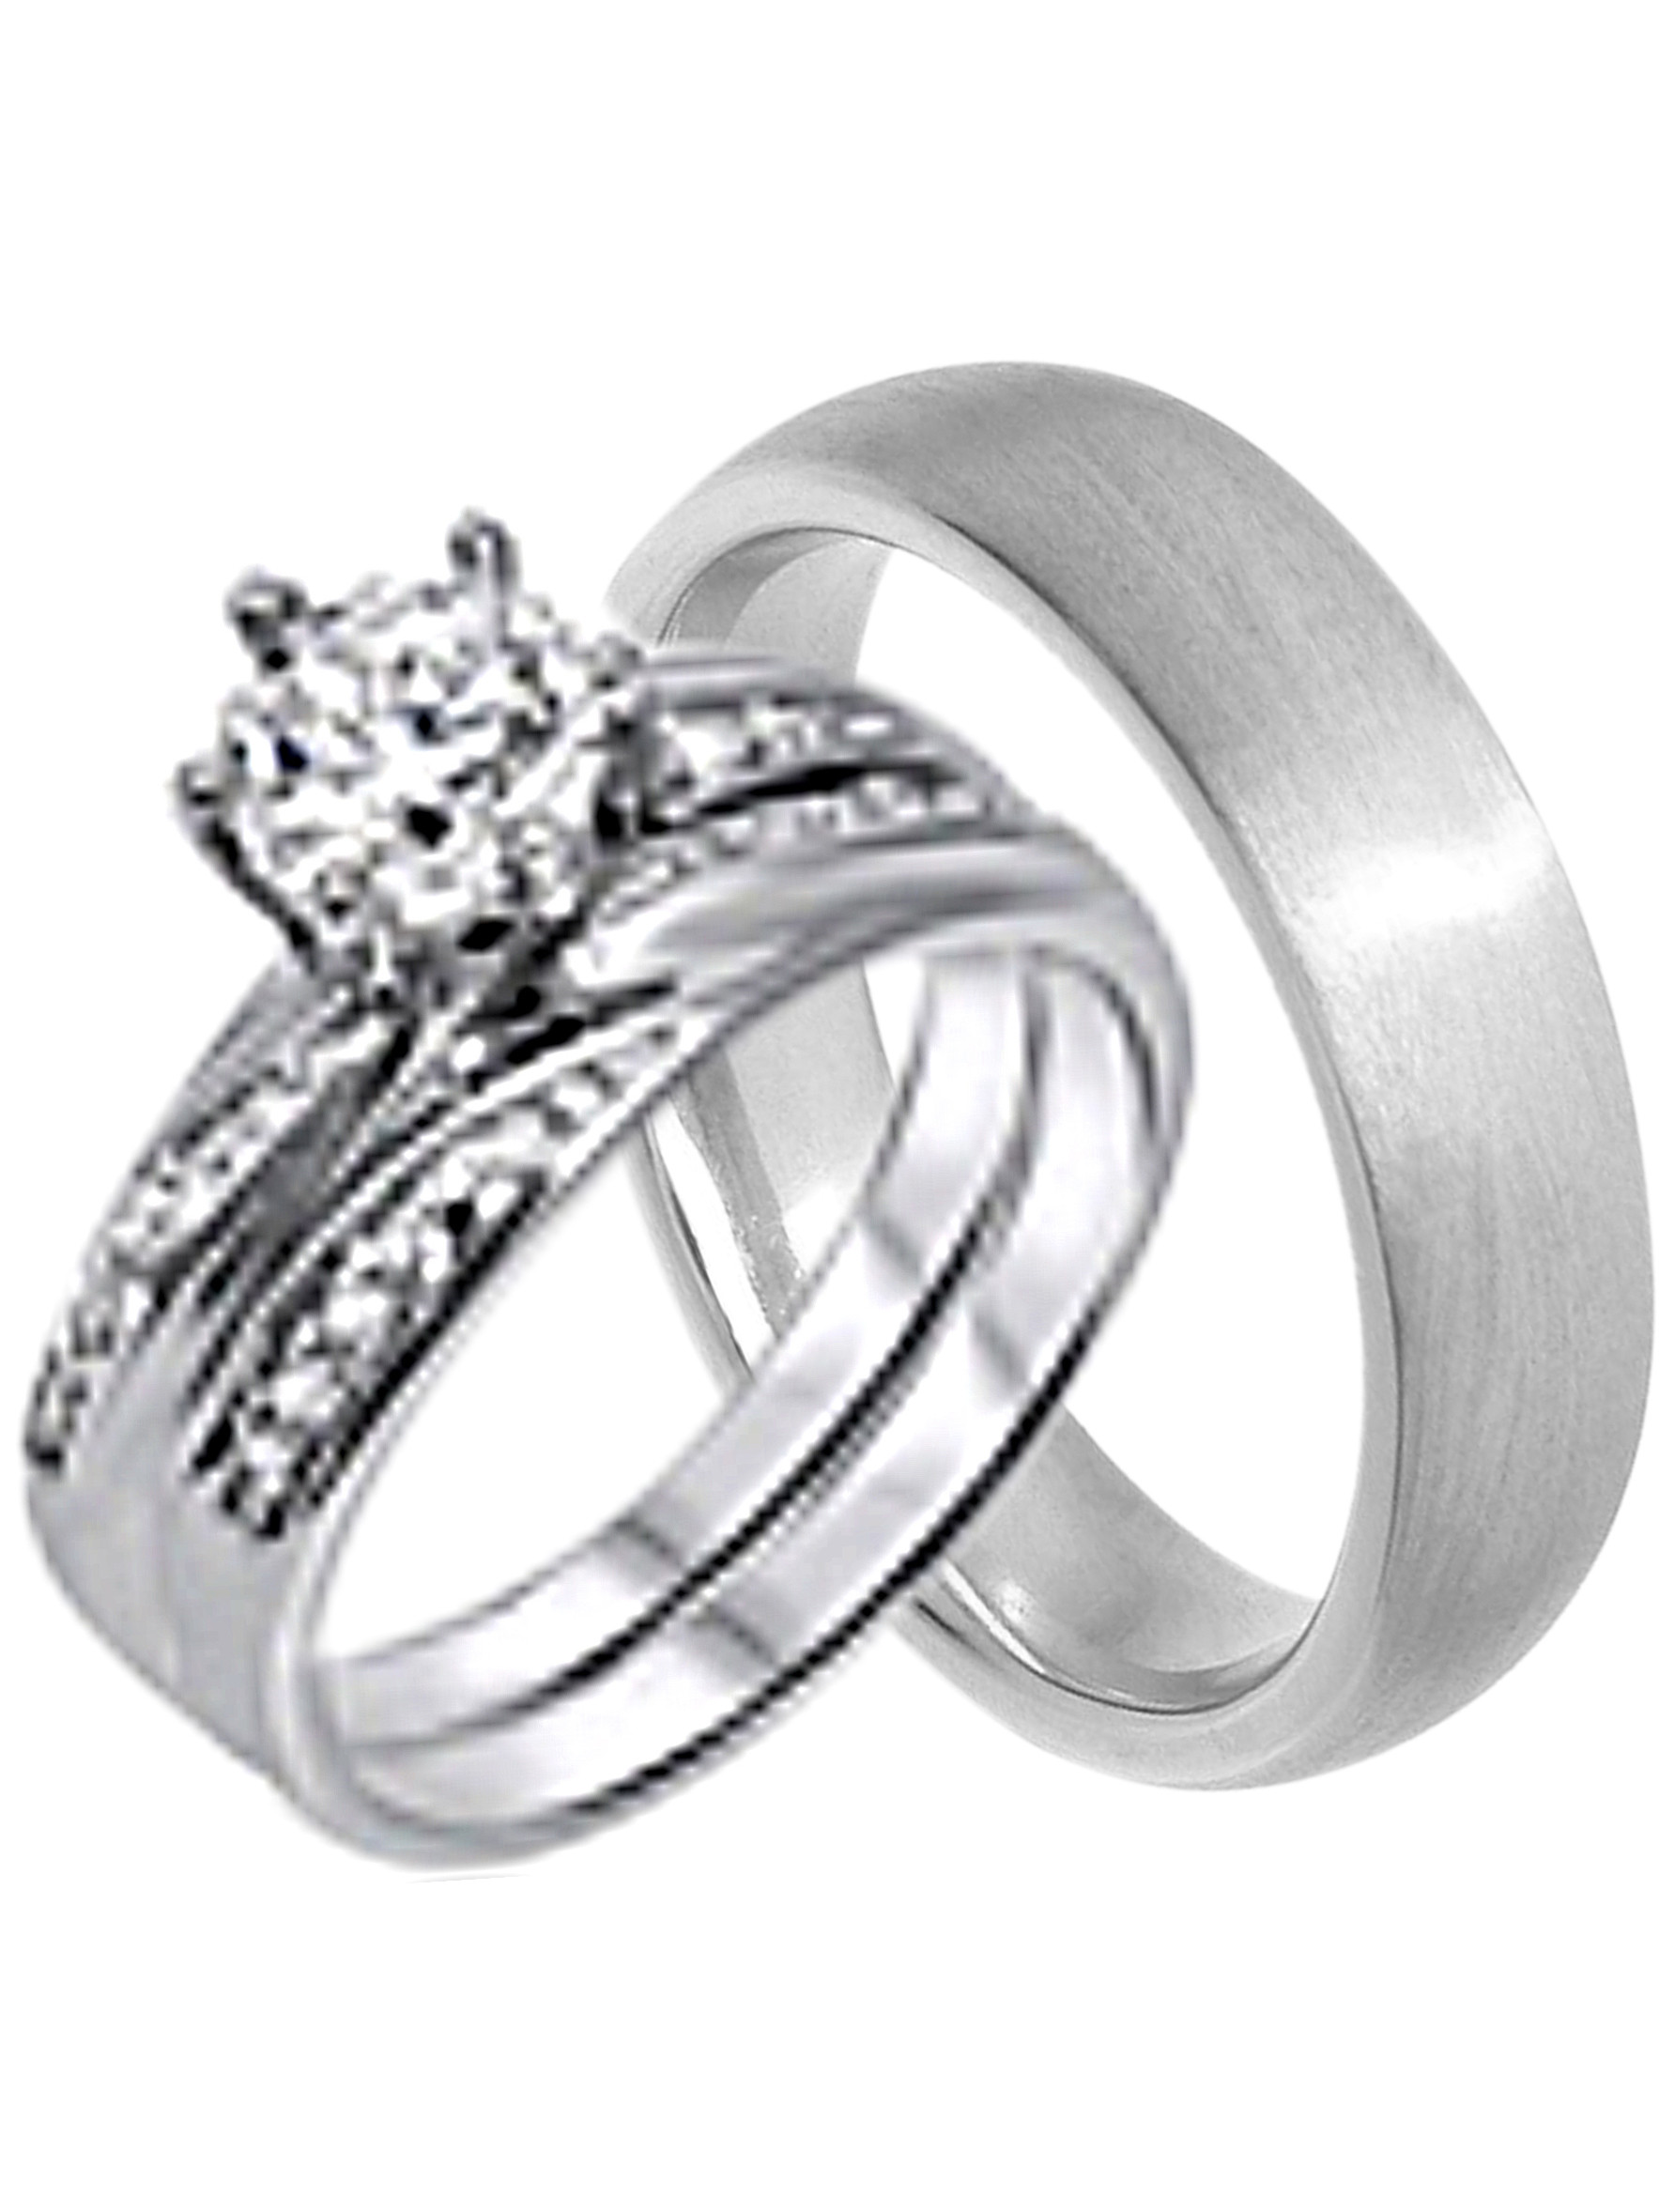 Cheap Wedding Band Sets For Him And Her
 His and Hers Wedding Ring Set Cheap Wedding Bands for Him